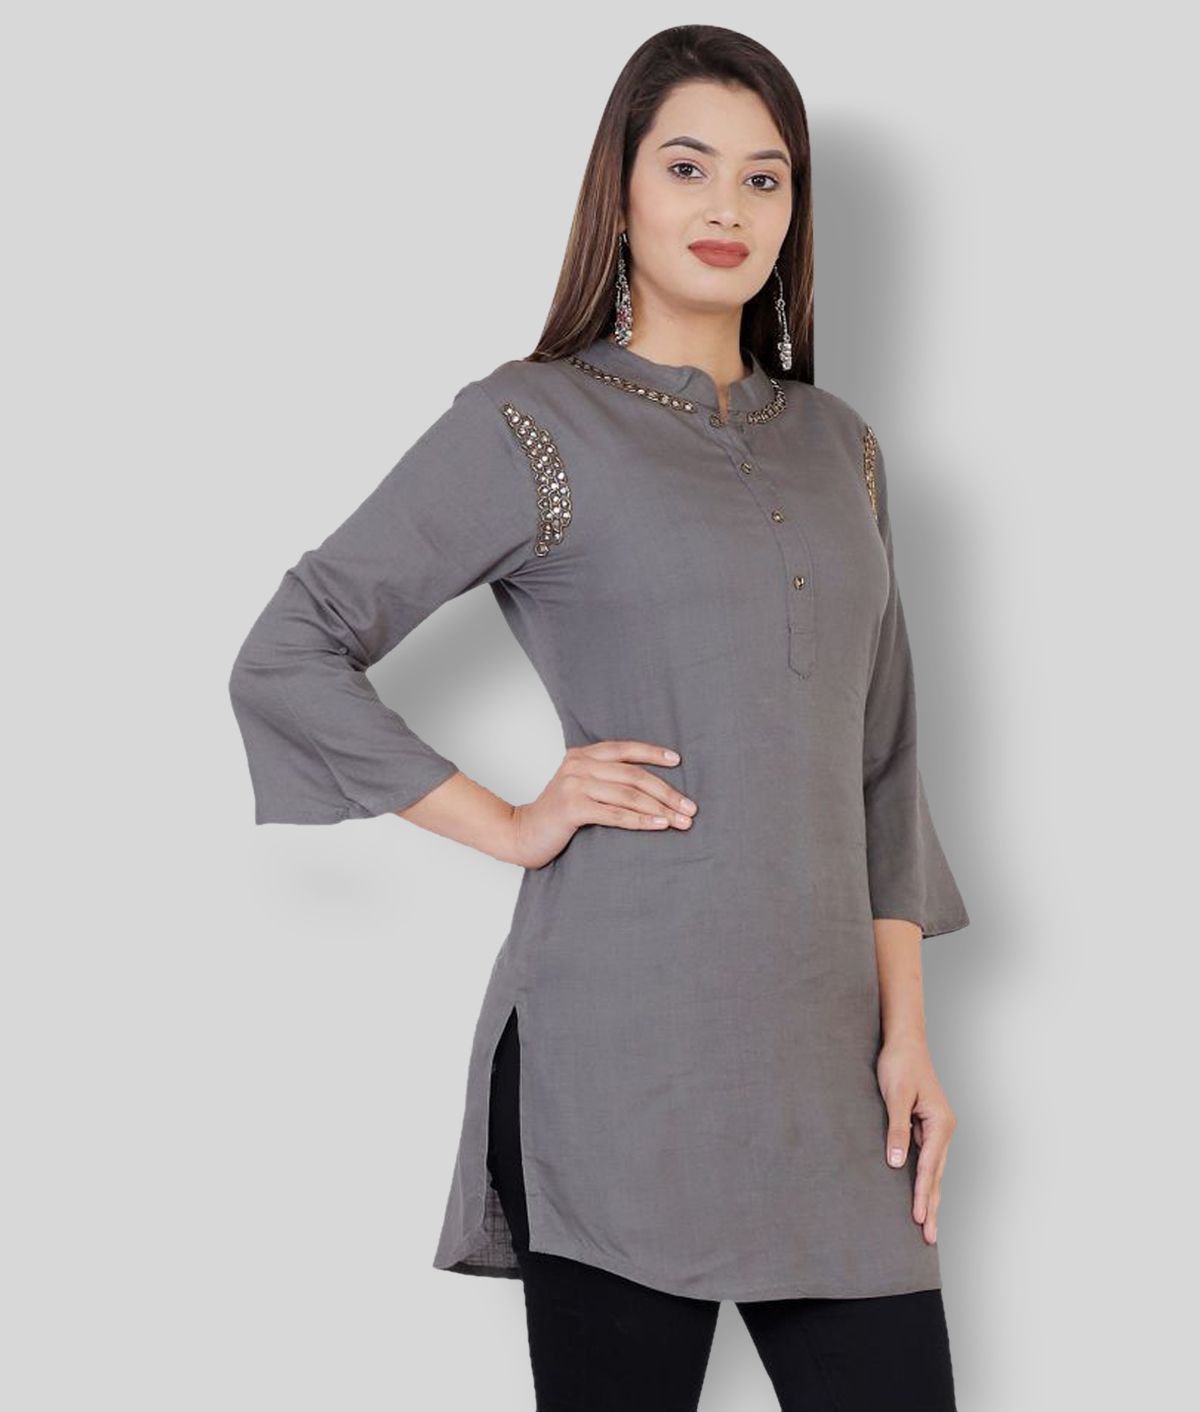 Buy M.Tex Kurti For Women Blue Color Cap Sleeves Boat Neck Crepe Kurta (Pack  of 1) XXXXX-Large at Amazon.in